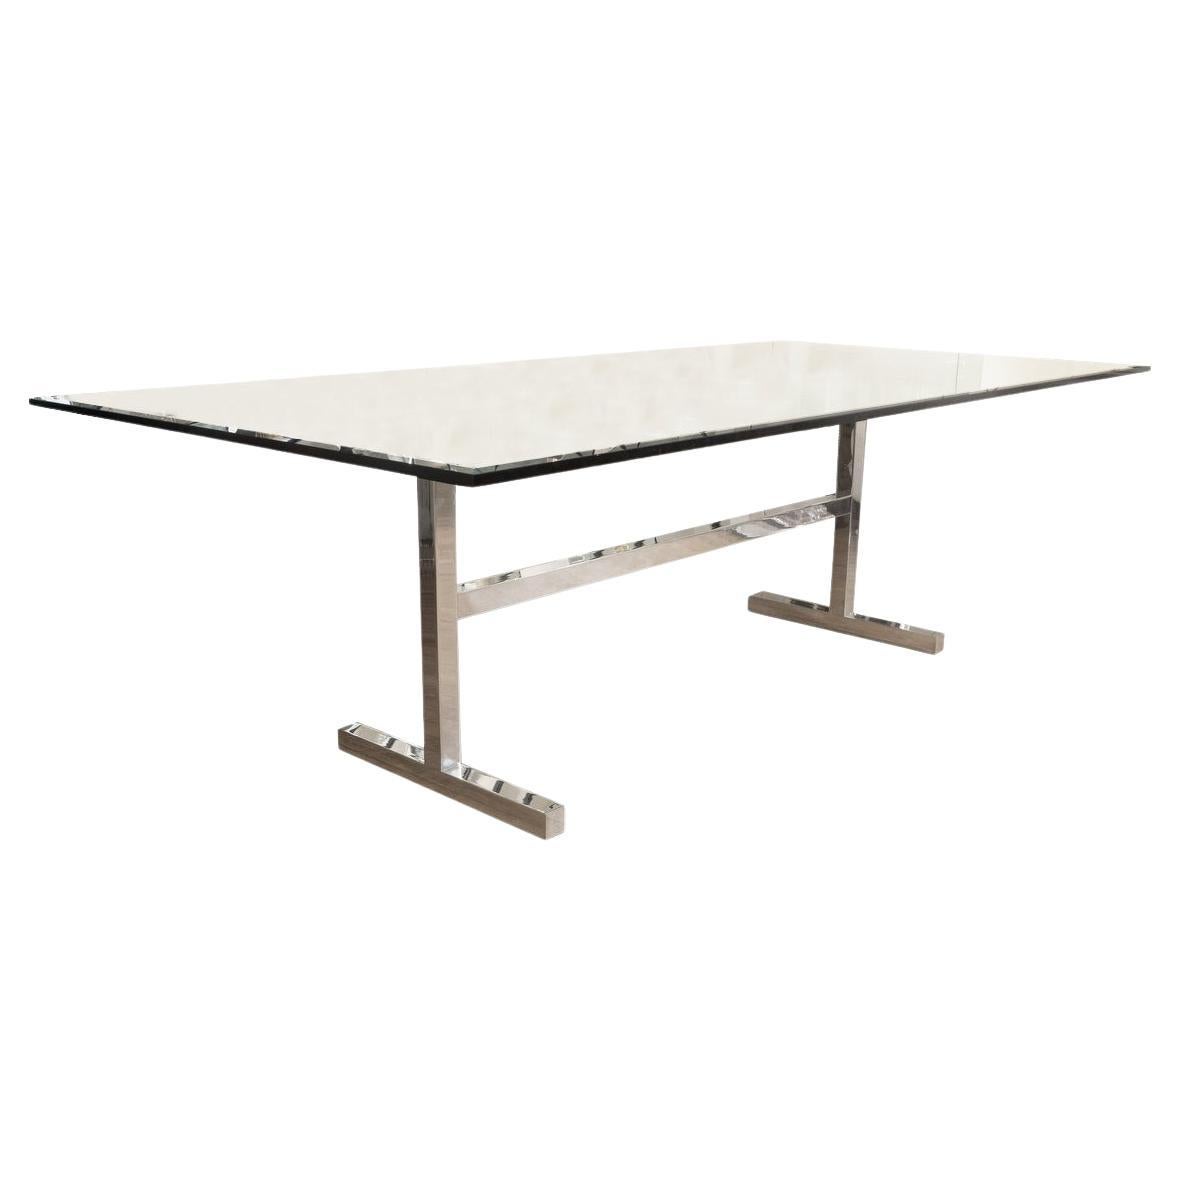 Rectangular glass and nickel dinning table For Sale